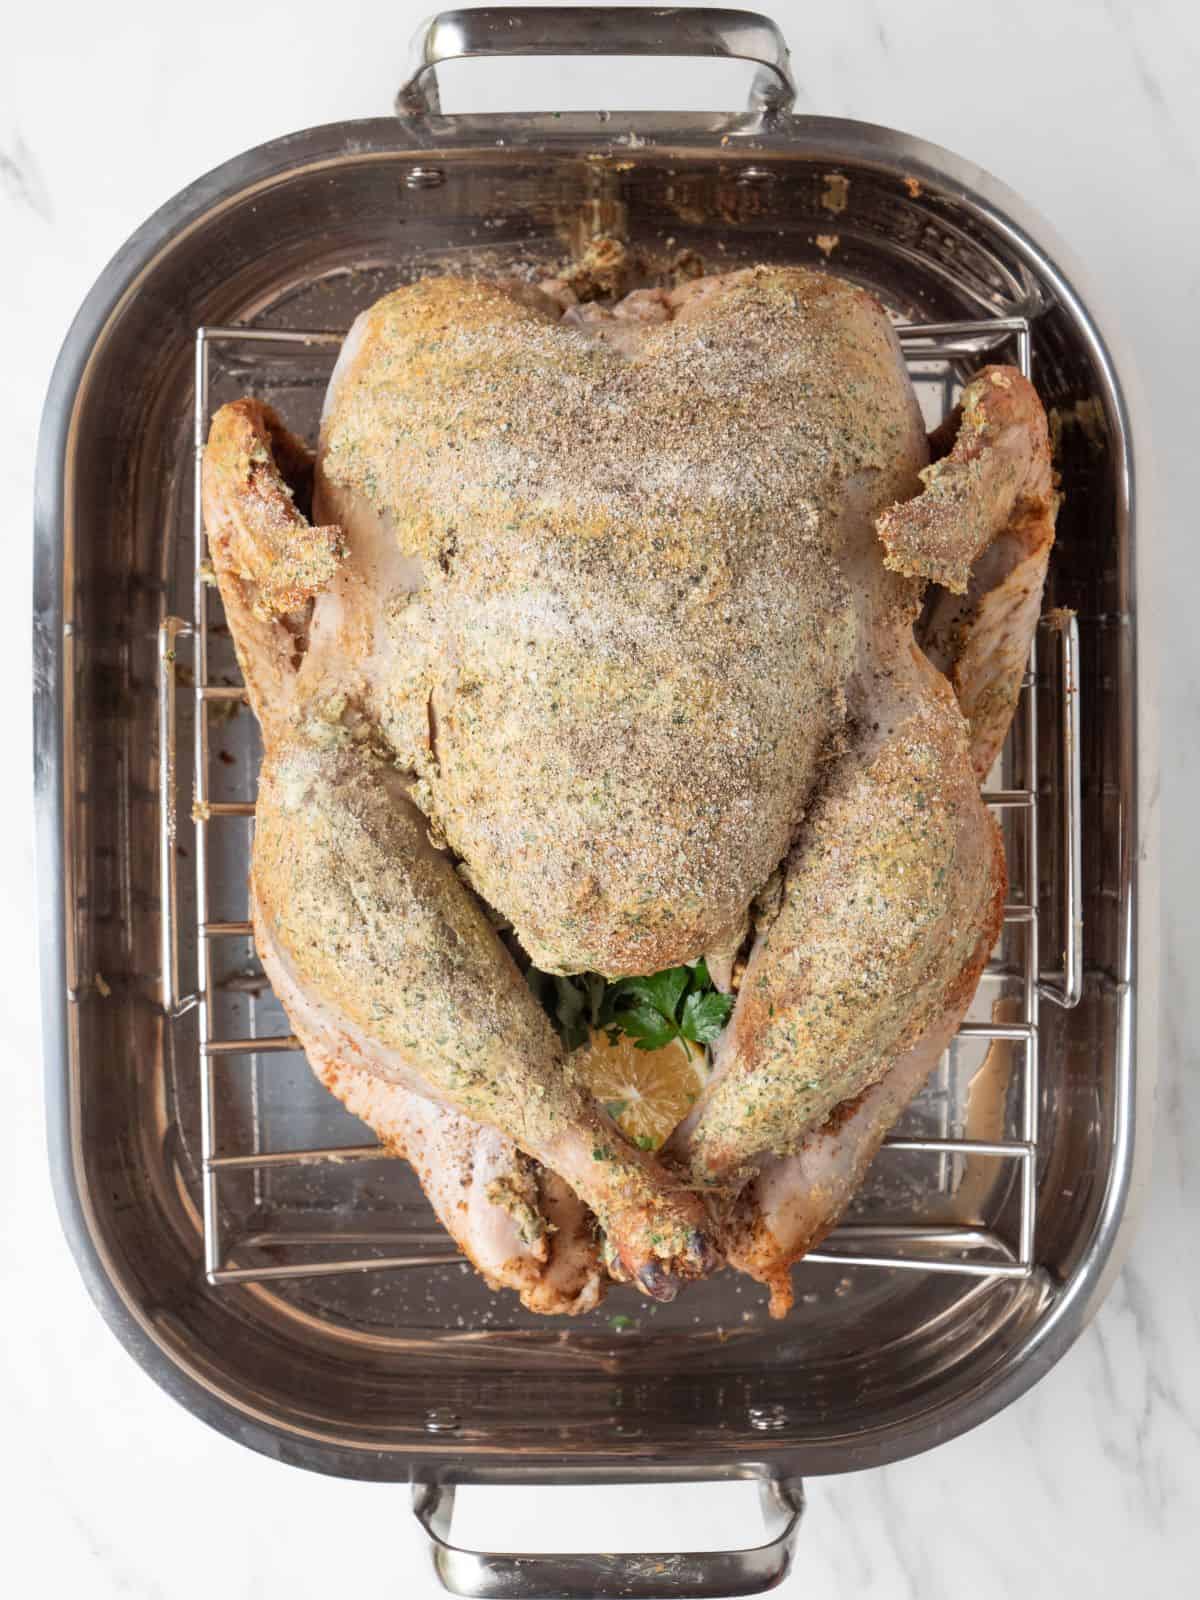 A roasting pan with a wire rack and a whole turkey placed on top, smeared with compound butter, ready to put in the oven for roasting.